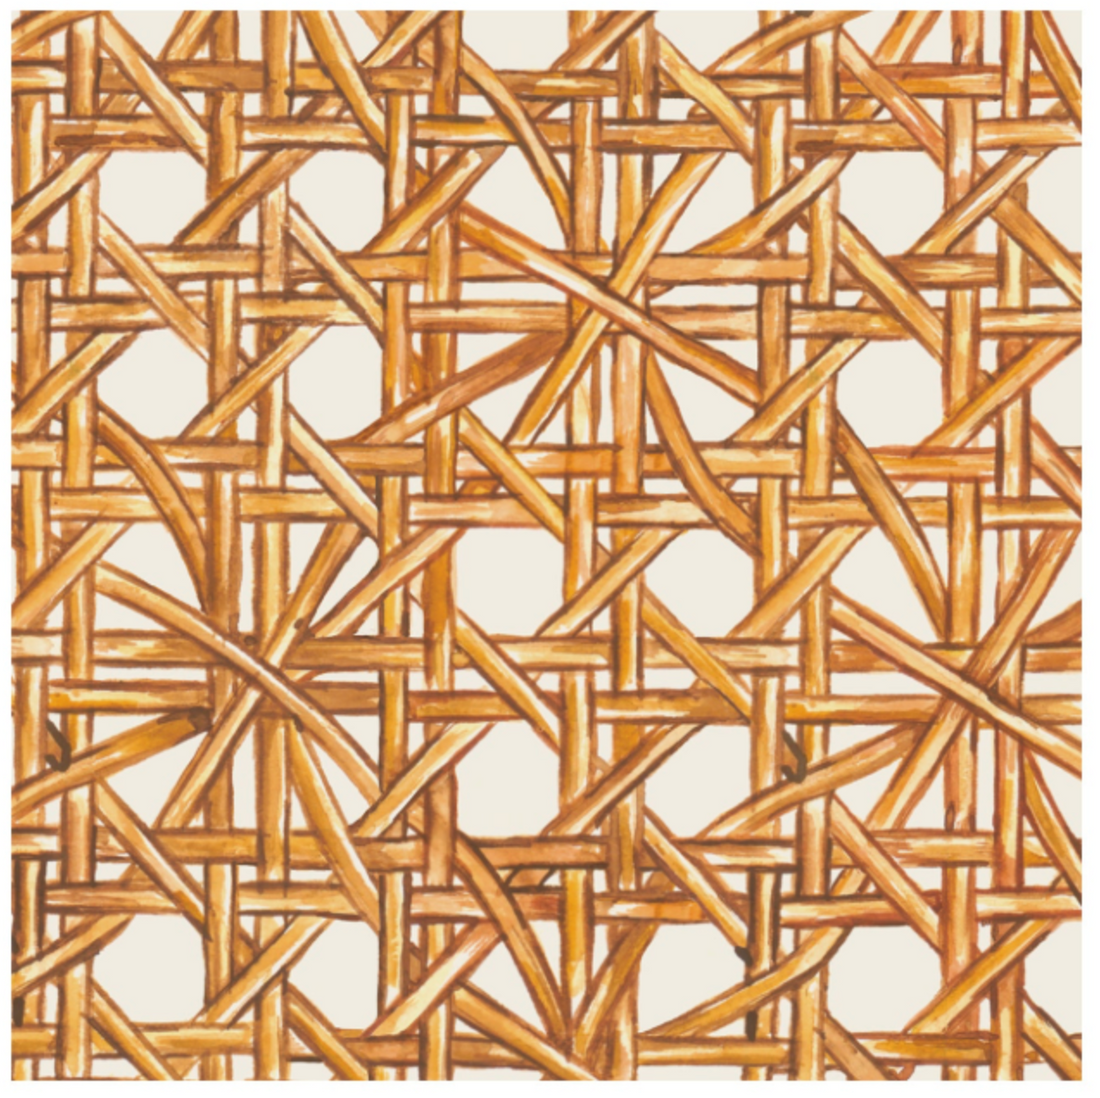 A square cocktail napkin featuring an illustrated pattern of tan rattan strands woven together intricately over a white background.